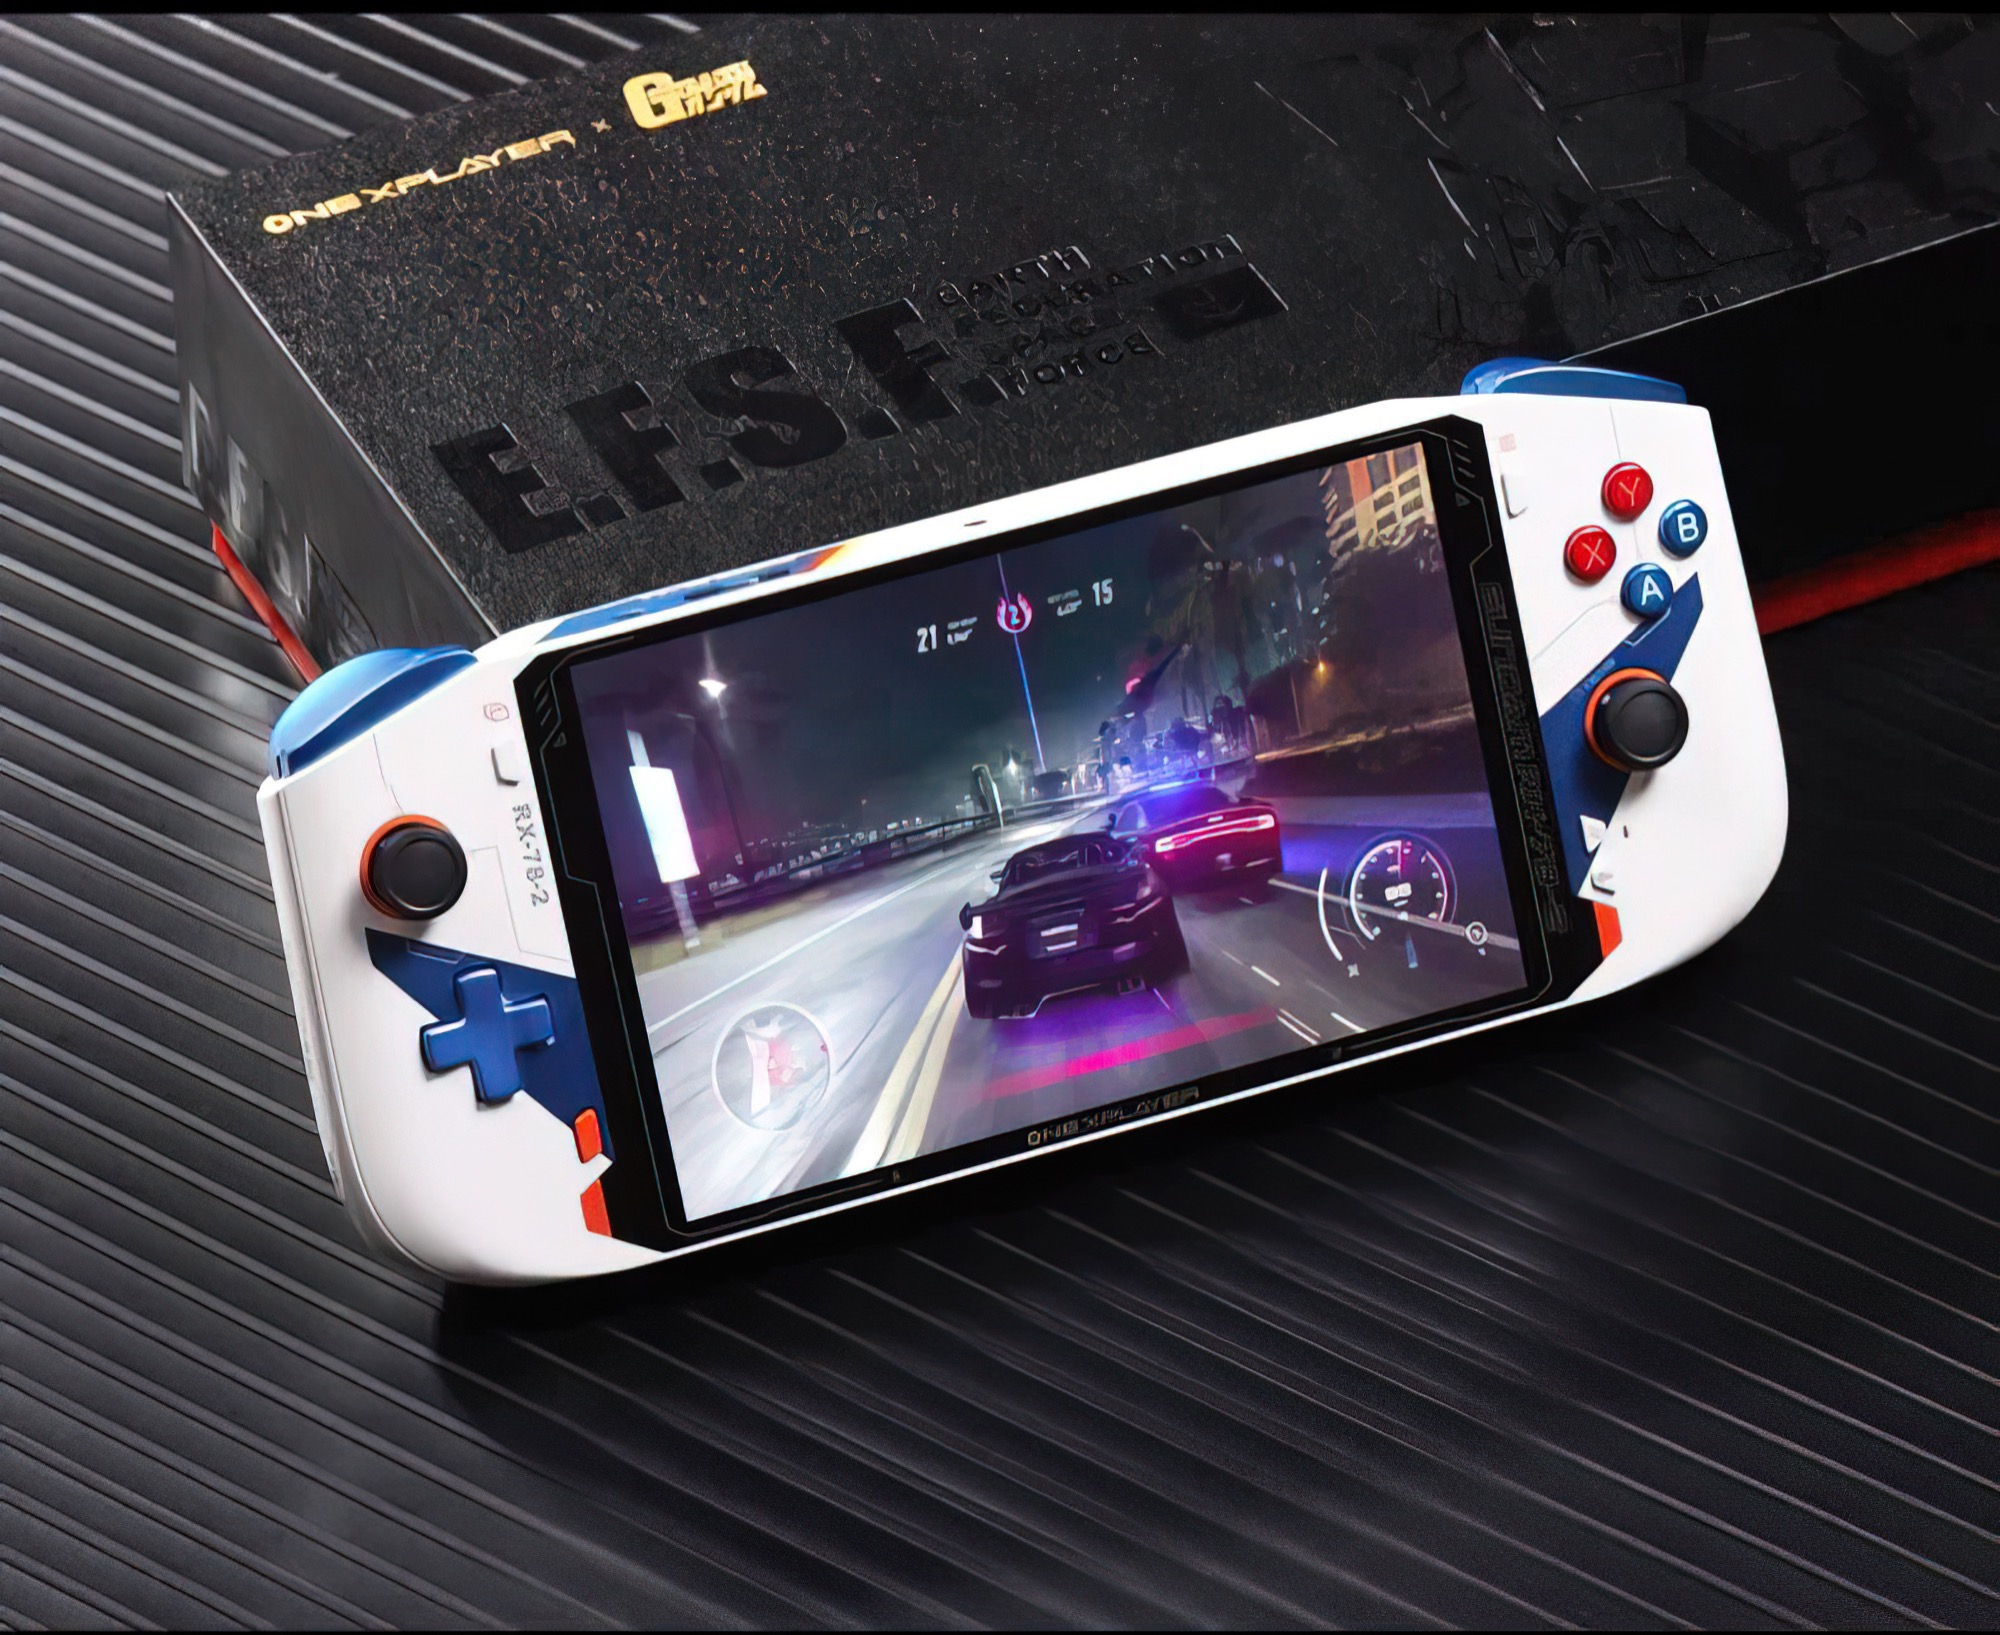 The OneXPlayer Mini Pro portable game starts with the AMD Ryzen 7 6800U in a stylish Gundam edition